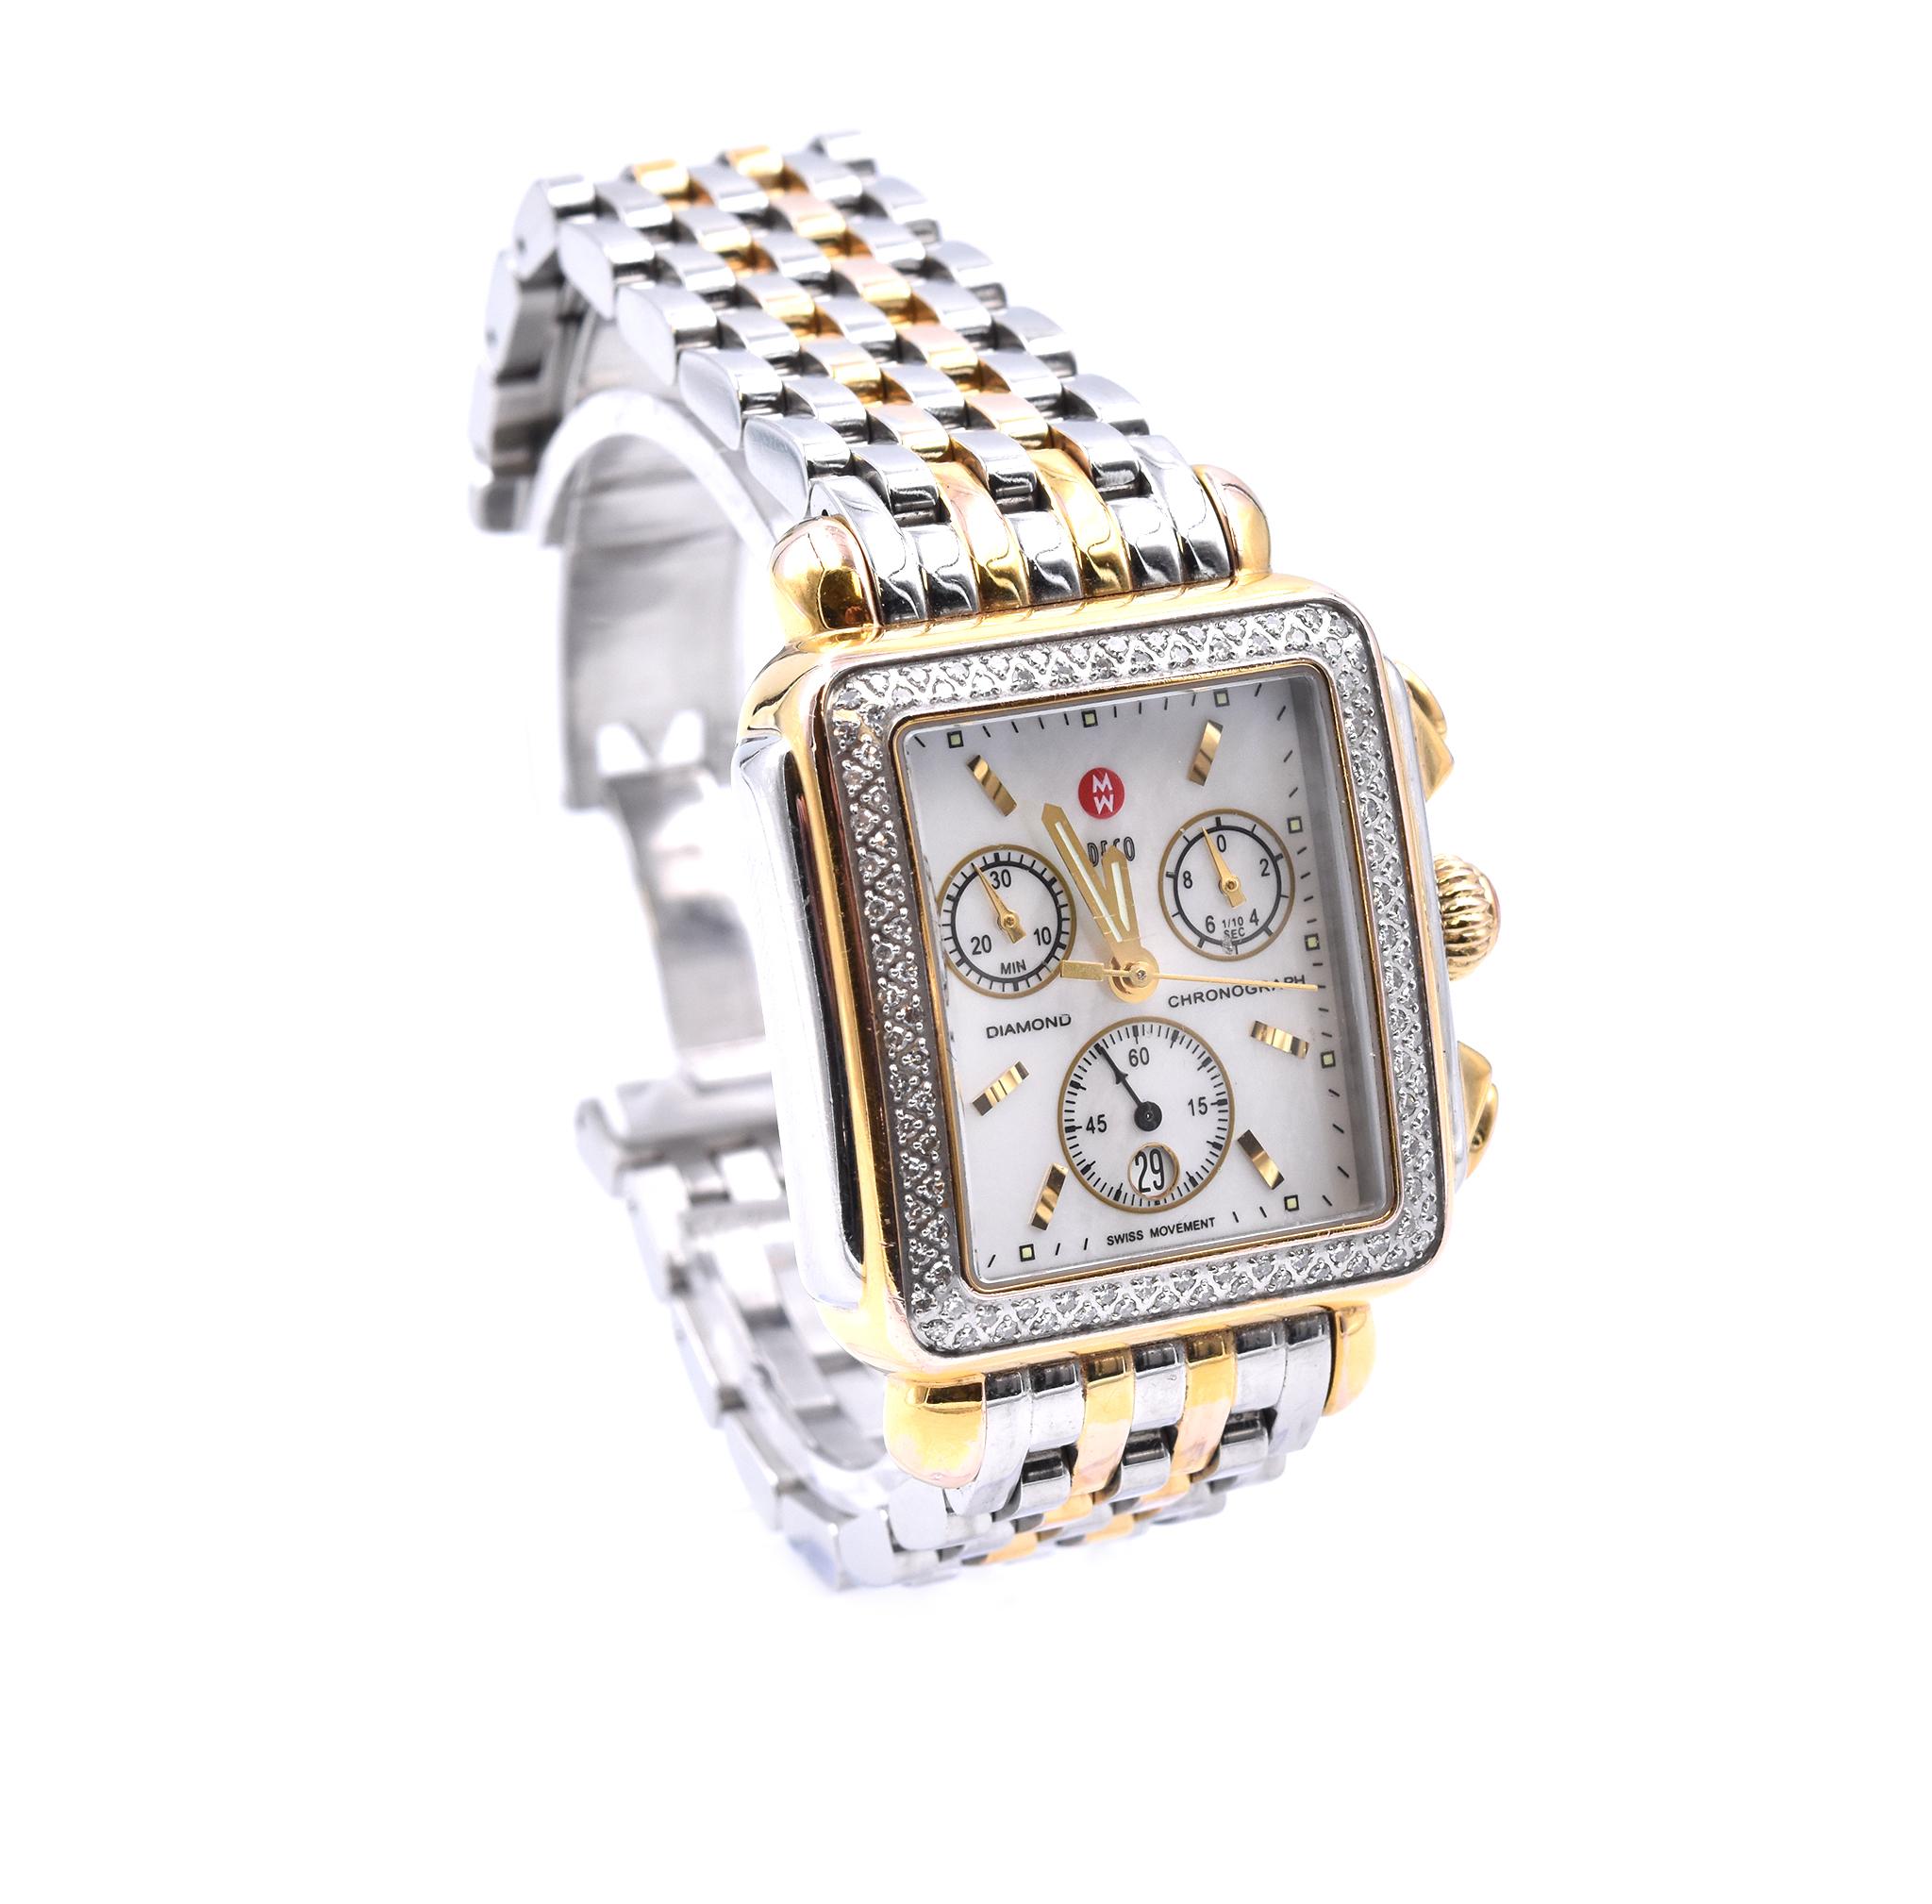 Movement: quartz
Function: hours, minutes, seconds, date, chronograph
Case: 32mm X 34mm round case, sapphire crystal
Dial: mother of pearl stick dial 
Band: two tone stainless steel panther bracelet
Serial #: B11051XXX
Reference #: MW03A01C5025

No